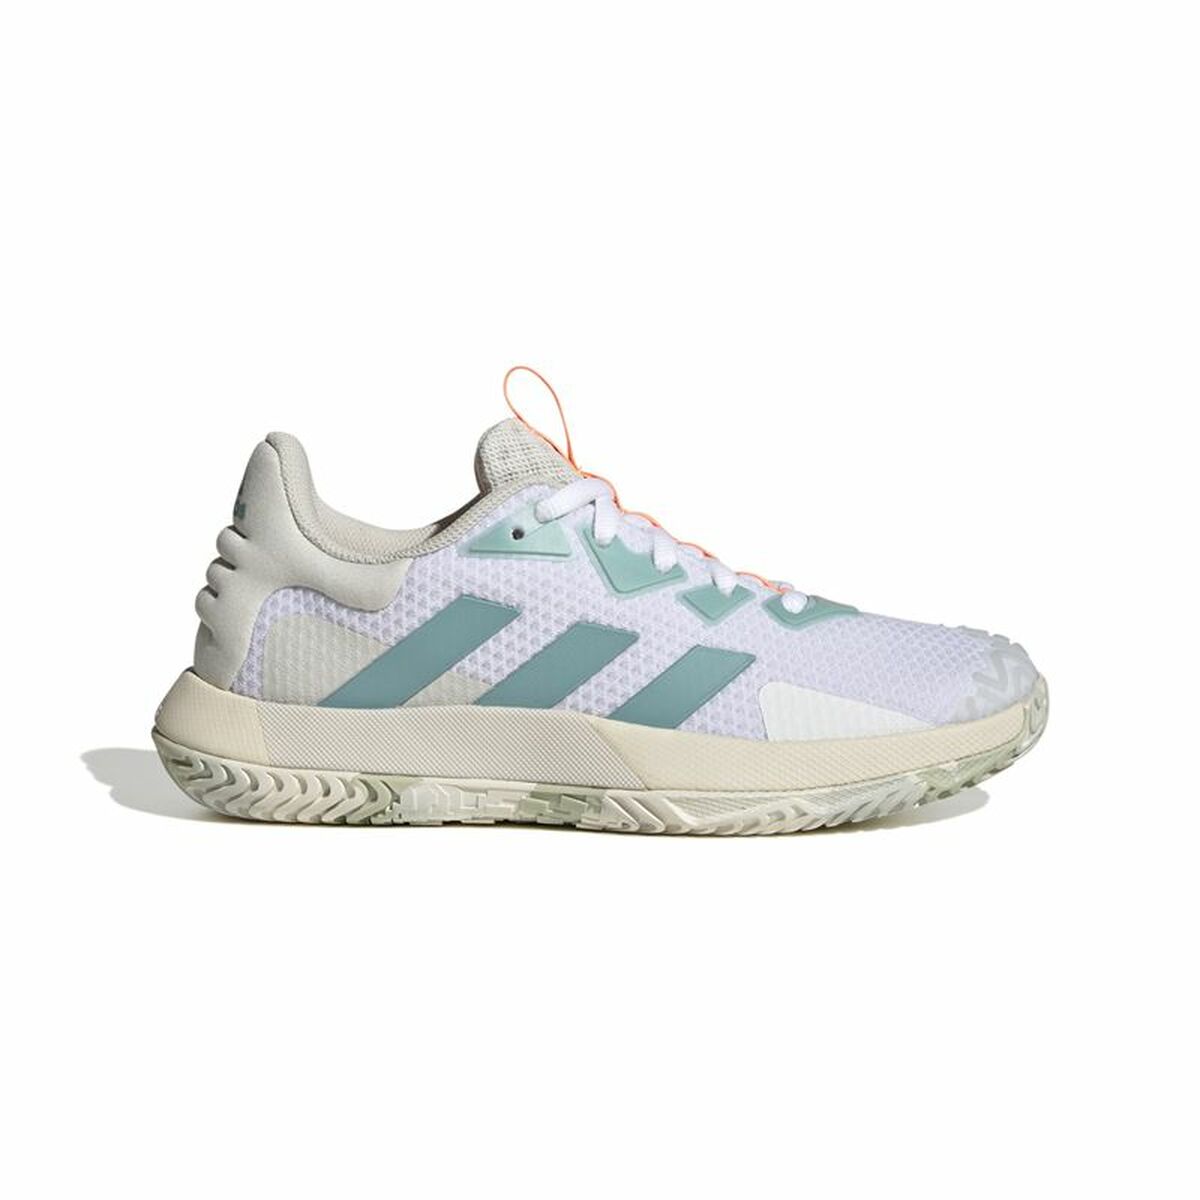 Adidas Solematch Control White Tennis Shoes